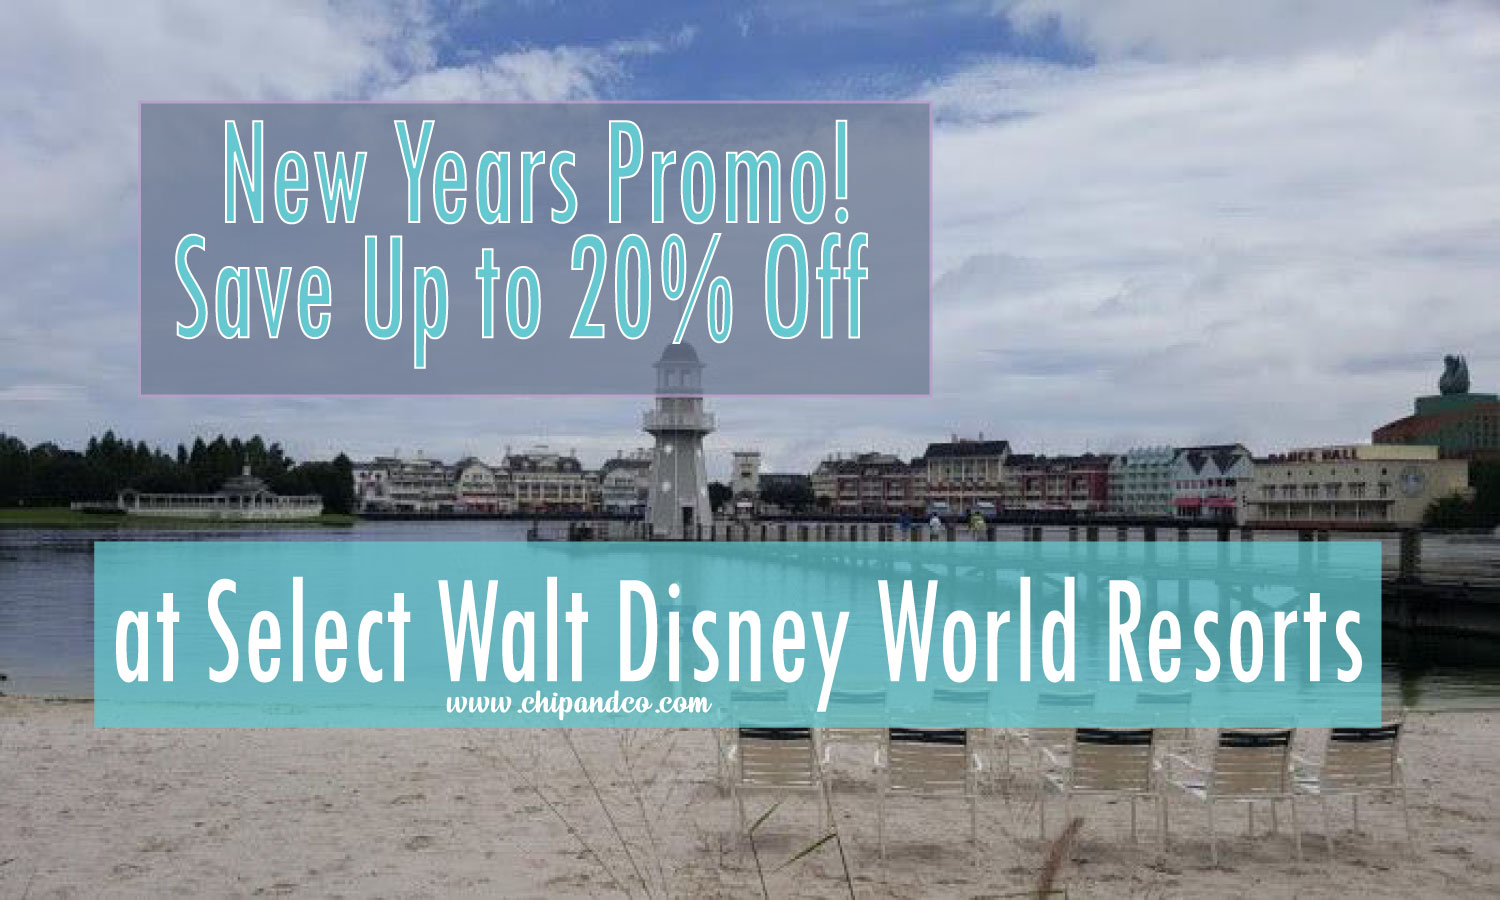 New Years Offer! Save Up to 20% off at Select Walt Disney World Resorts